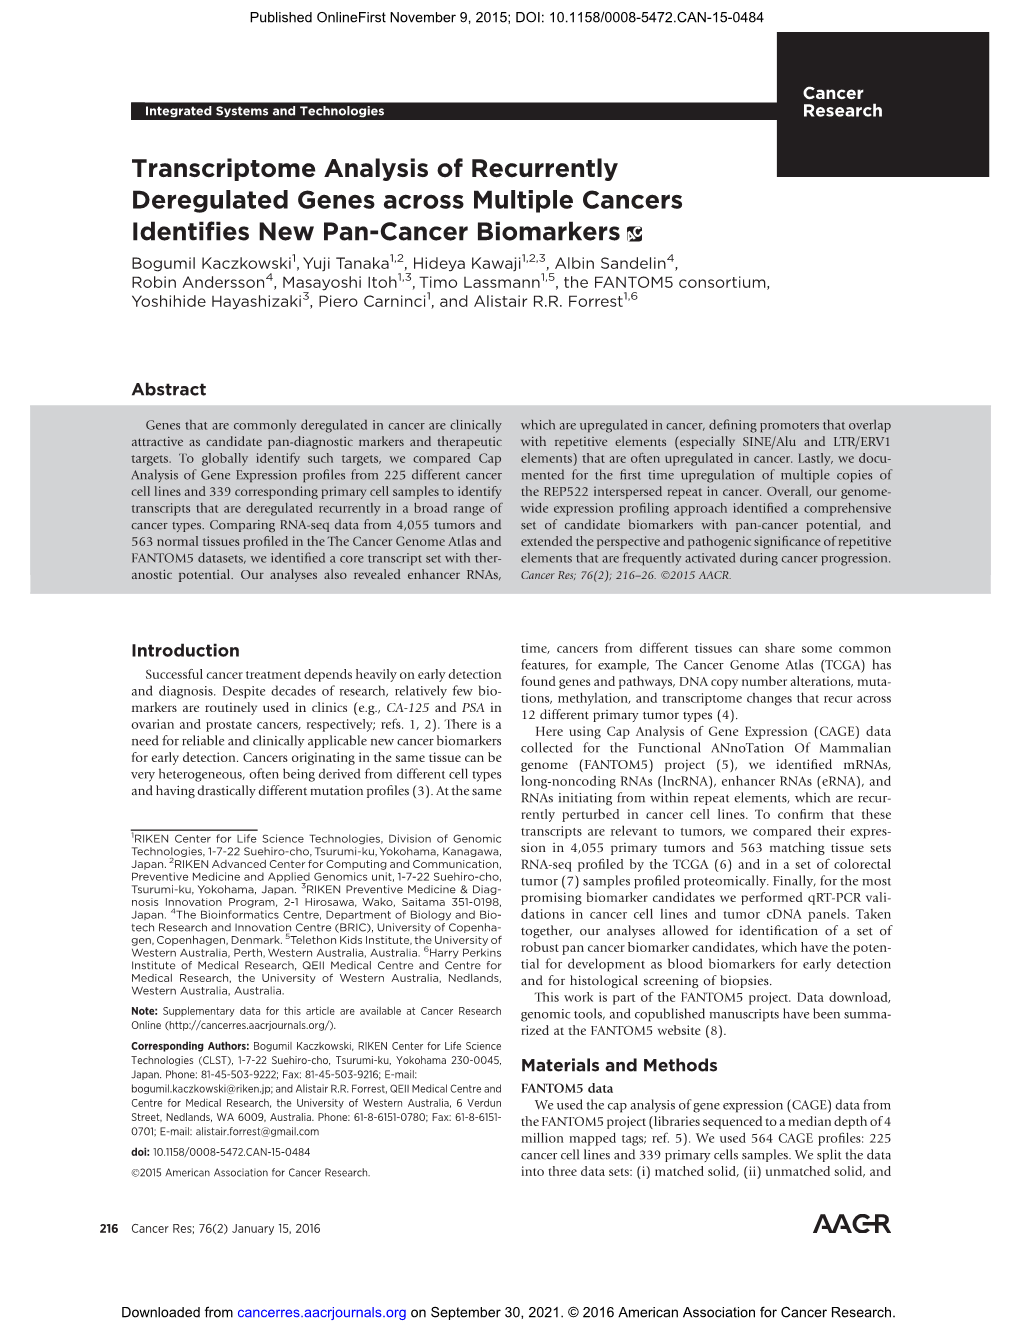 Transcriptome Analysis of Recurrently Deregulated Genes Across Multiple